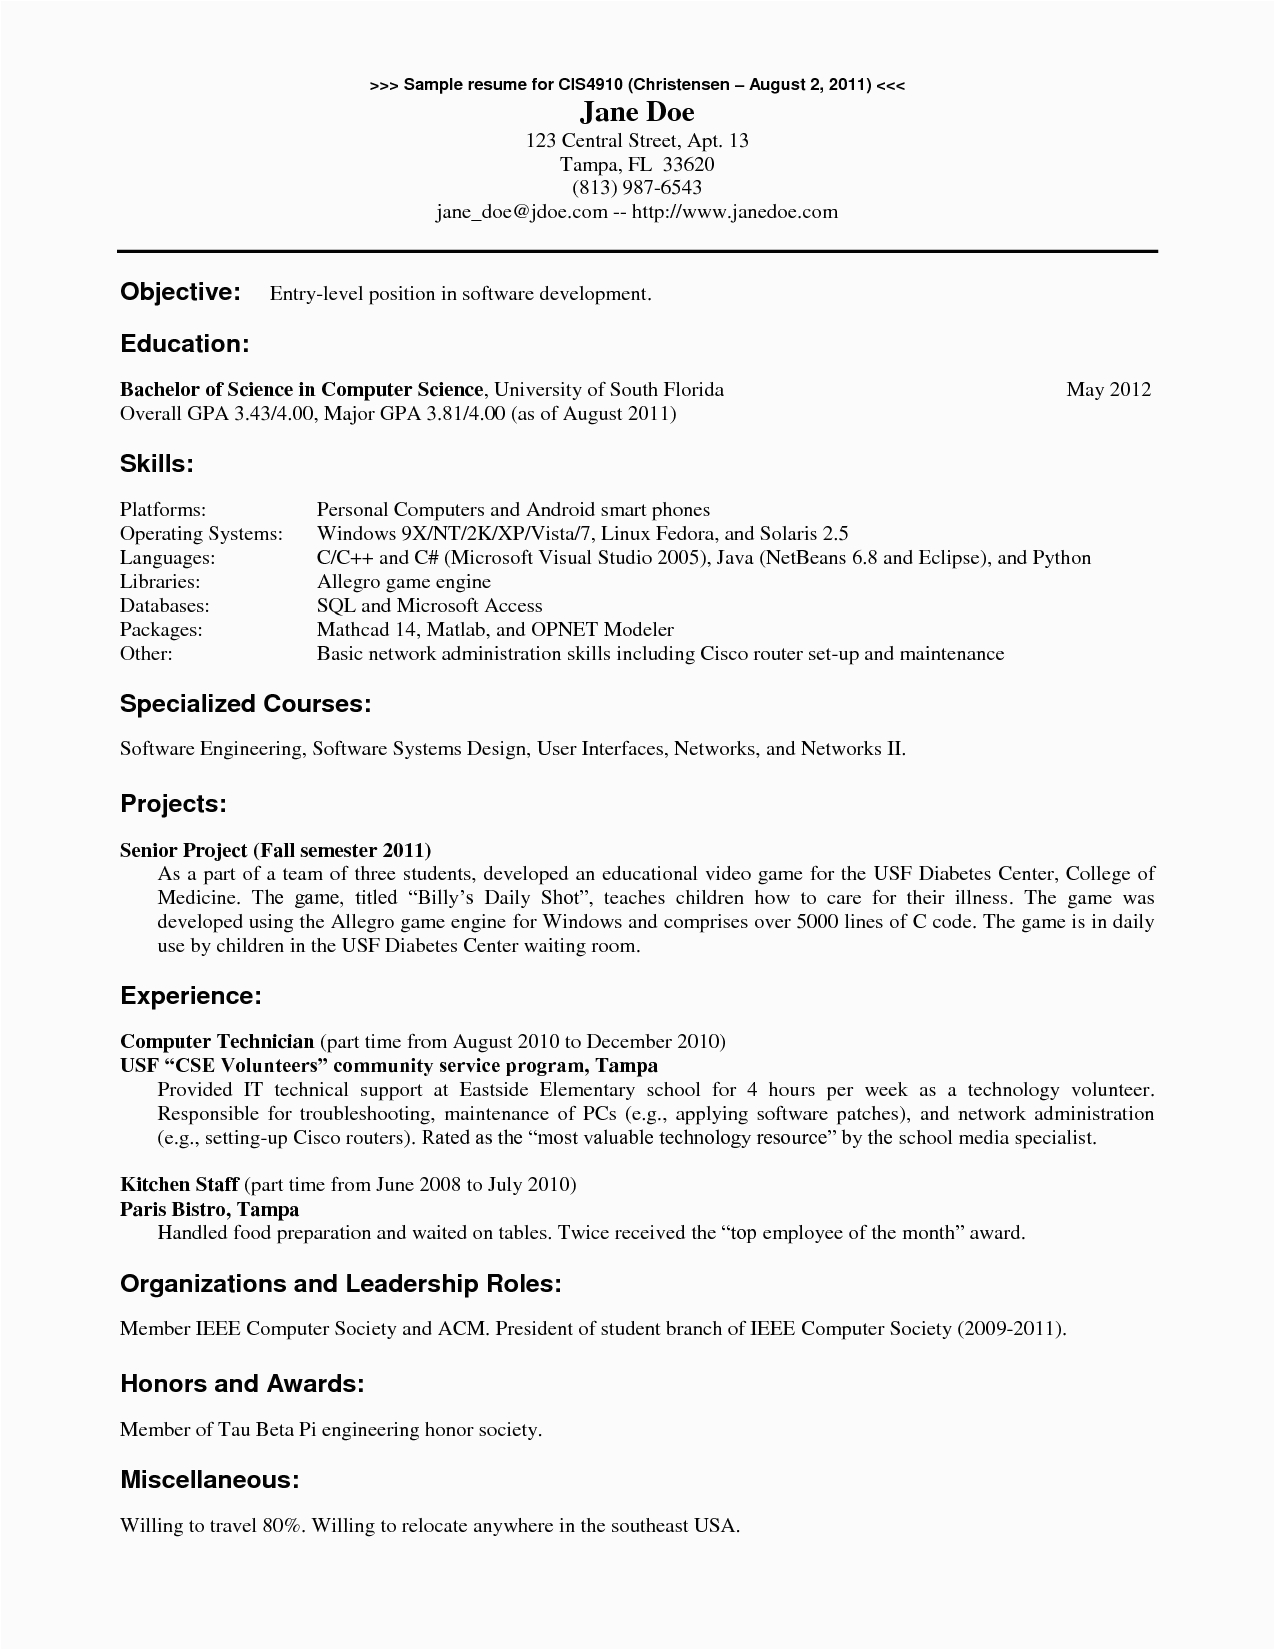 Sample Resume Entry Level Computer Science 12 13 Sample Puter Science Resume Lascazuelasphilly